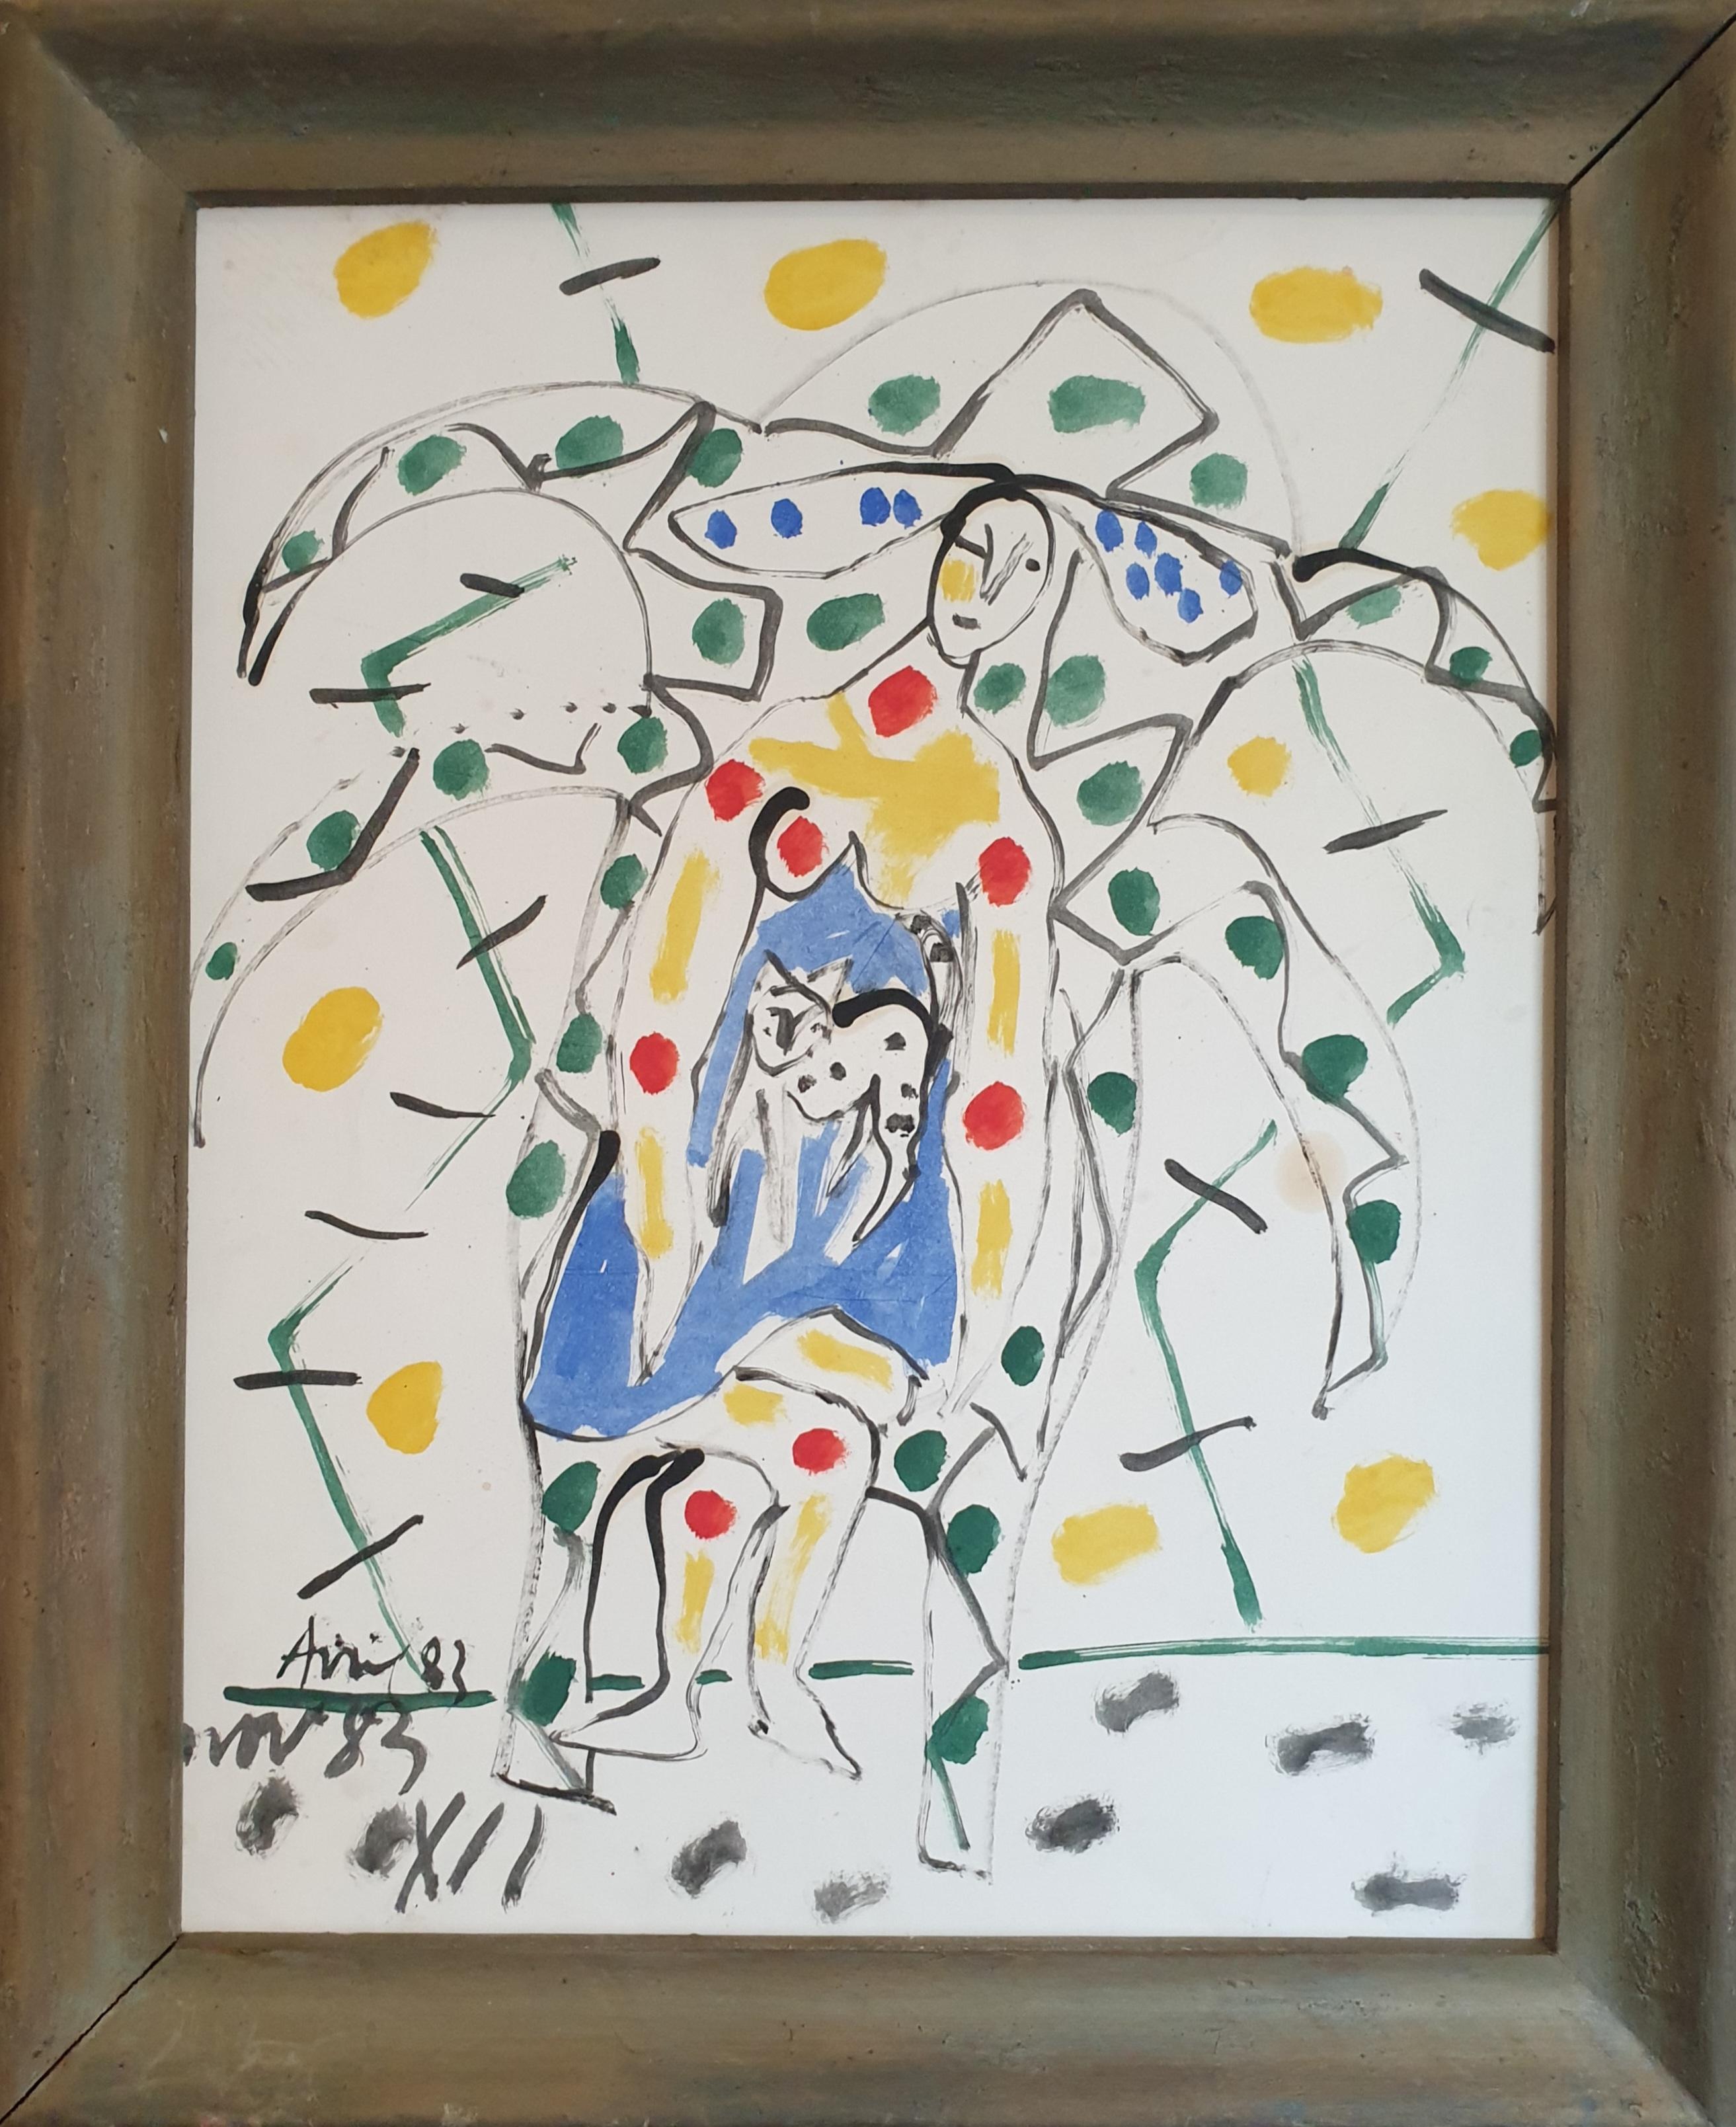 Woman Sitting With A Cat. Abstract Expressionist Work on Paper.